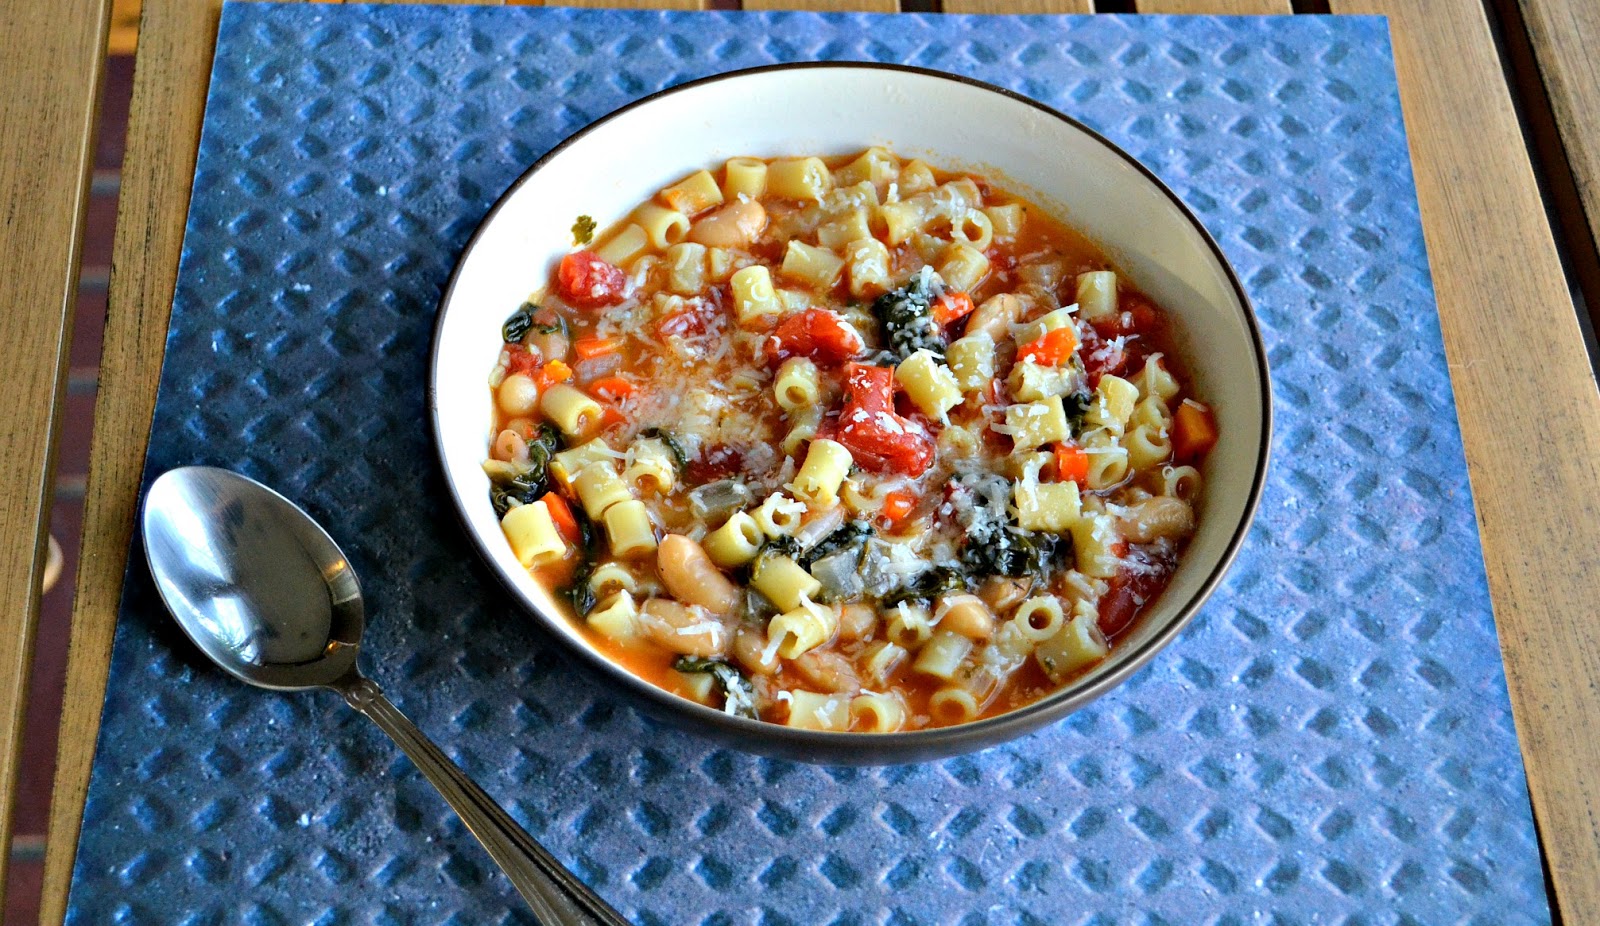 Pasta Fagioli: Meatless Monday - Hezzi-D's Books and Cooks